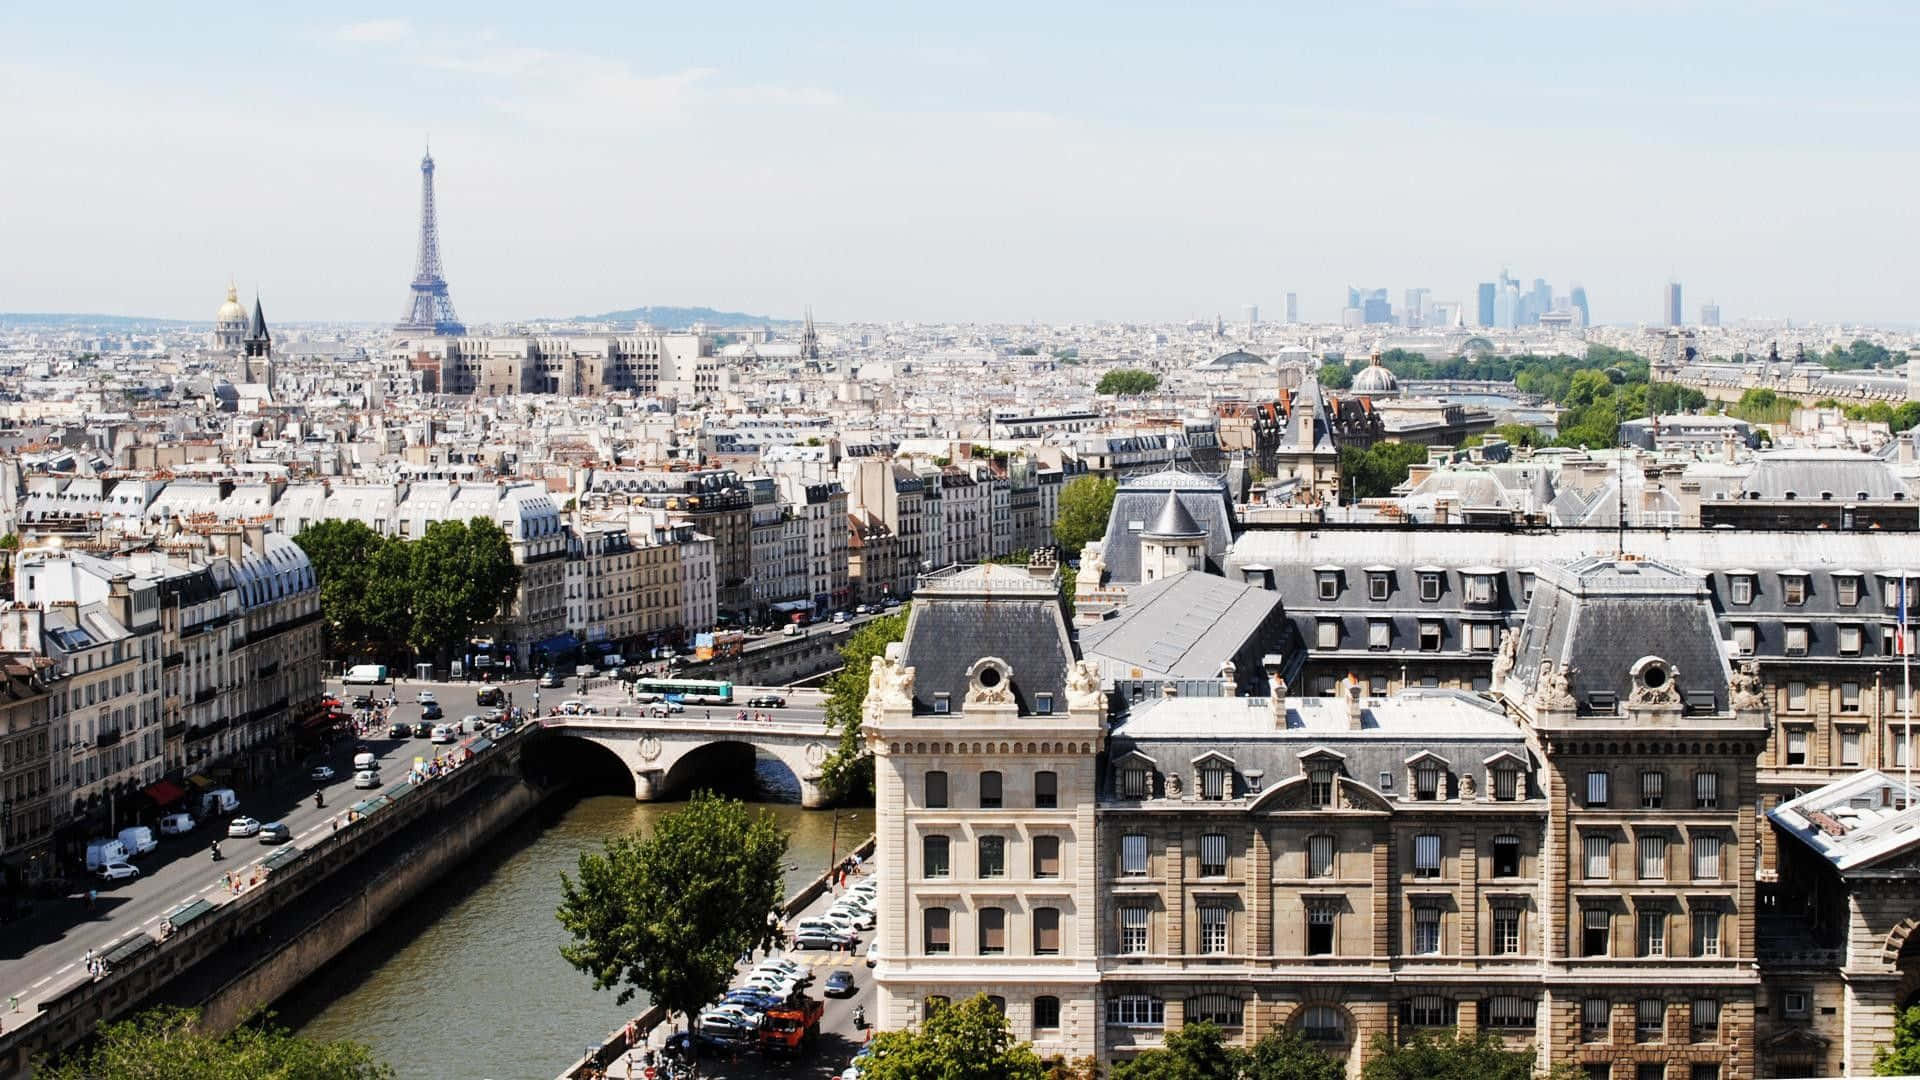 "Experience the beauty of Paris from the comfort of your desktop" Wallpaper